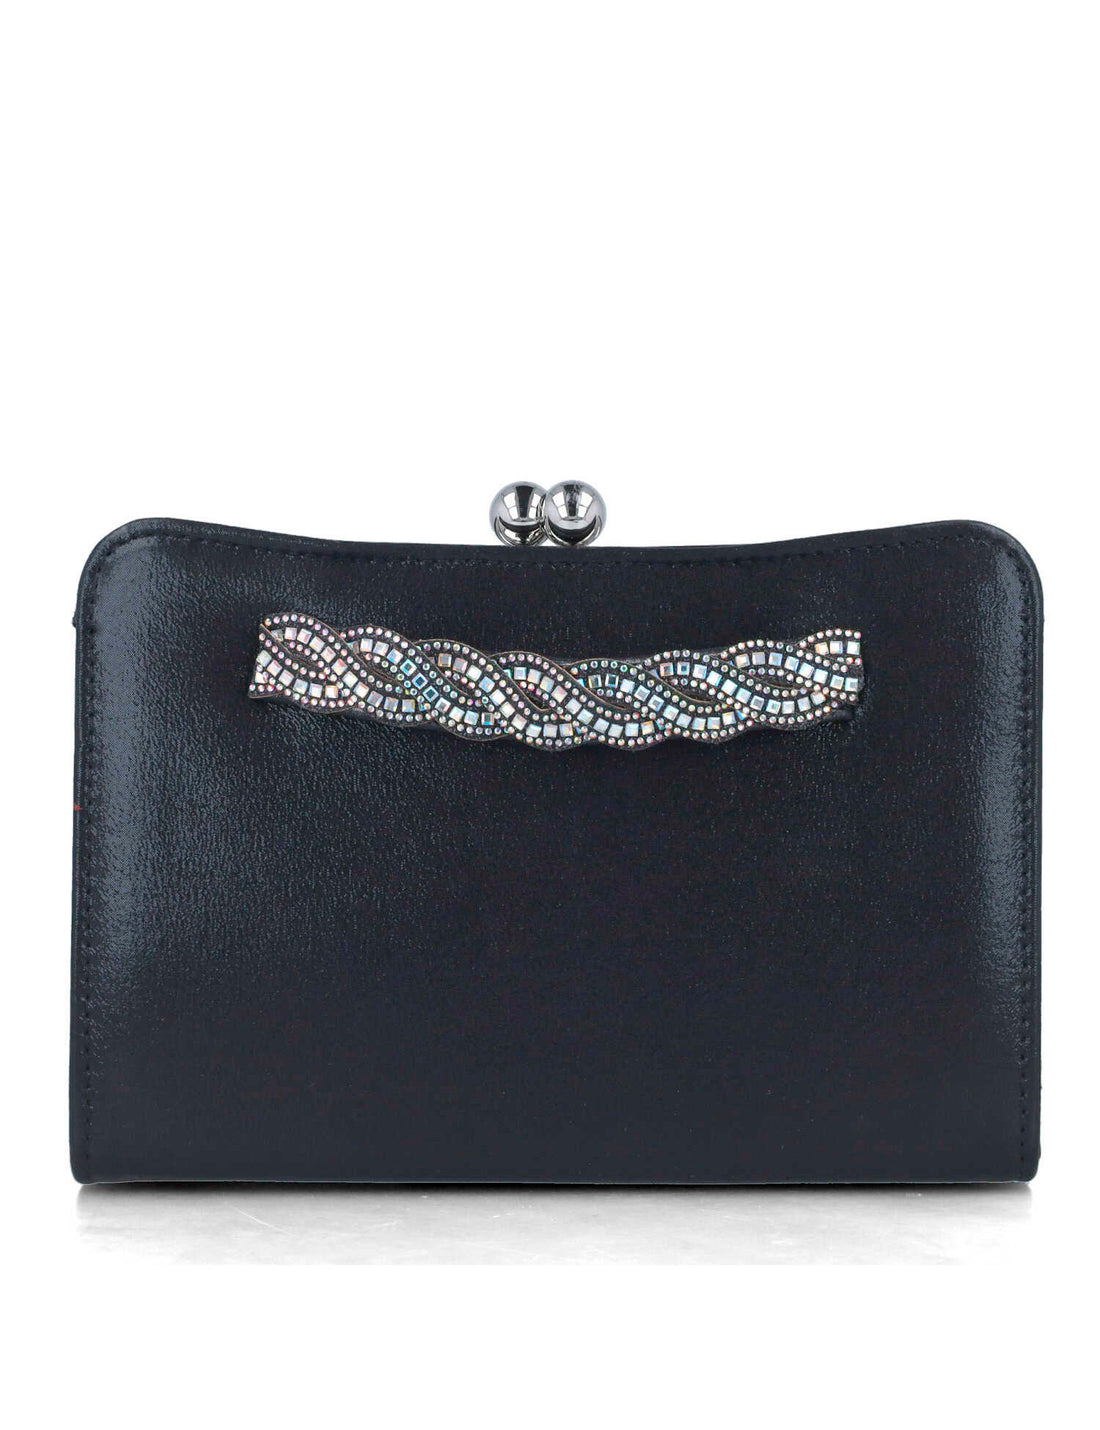 Black Clutch With Embellished Hand Strap_85490_01_01